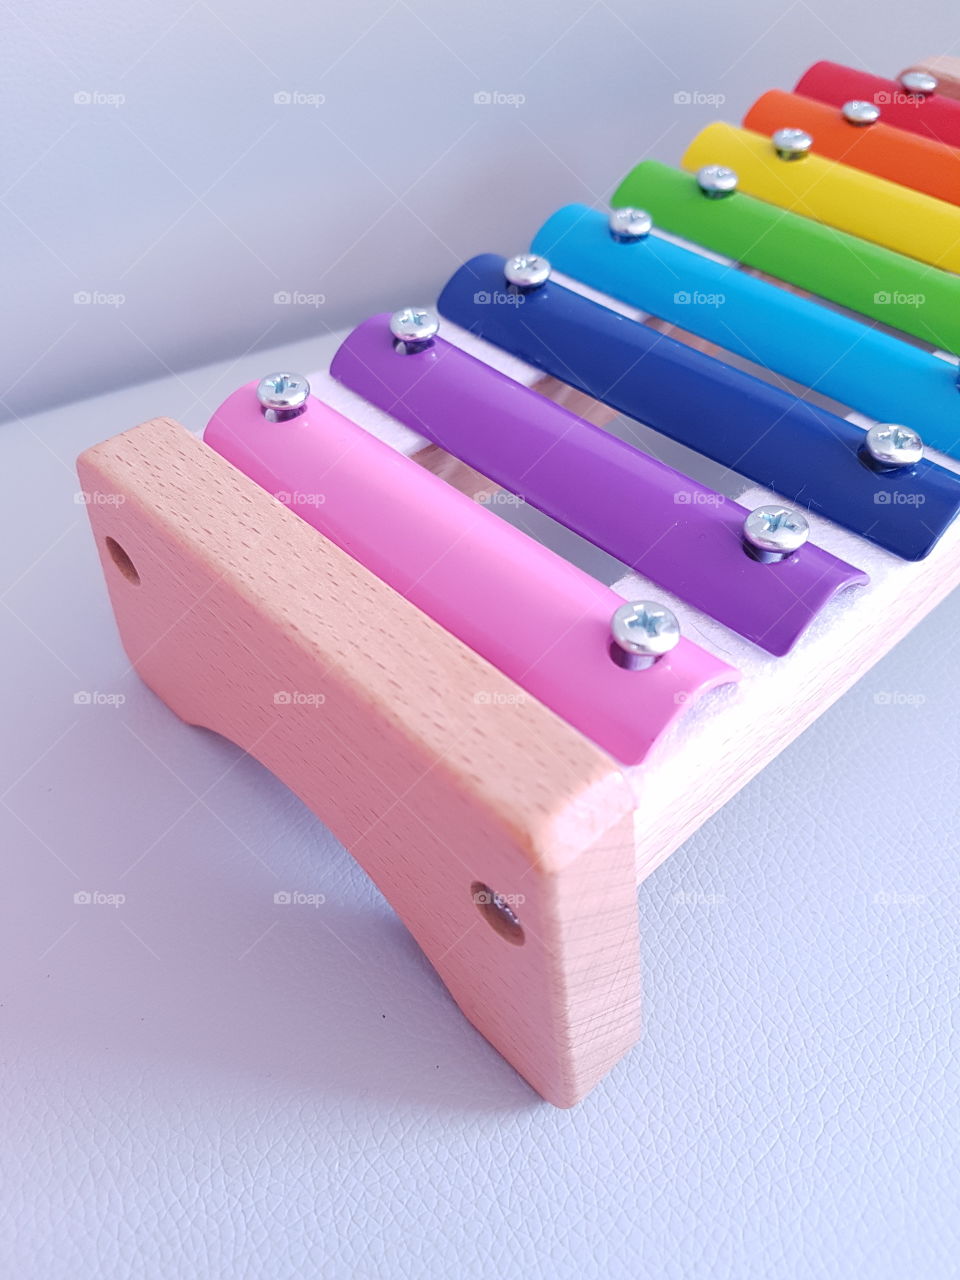 Xylophone focusing on the pink one